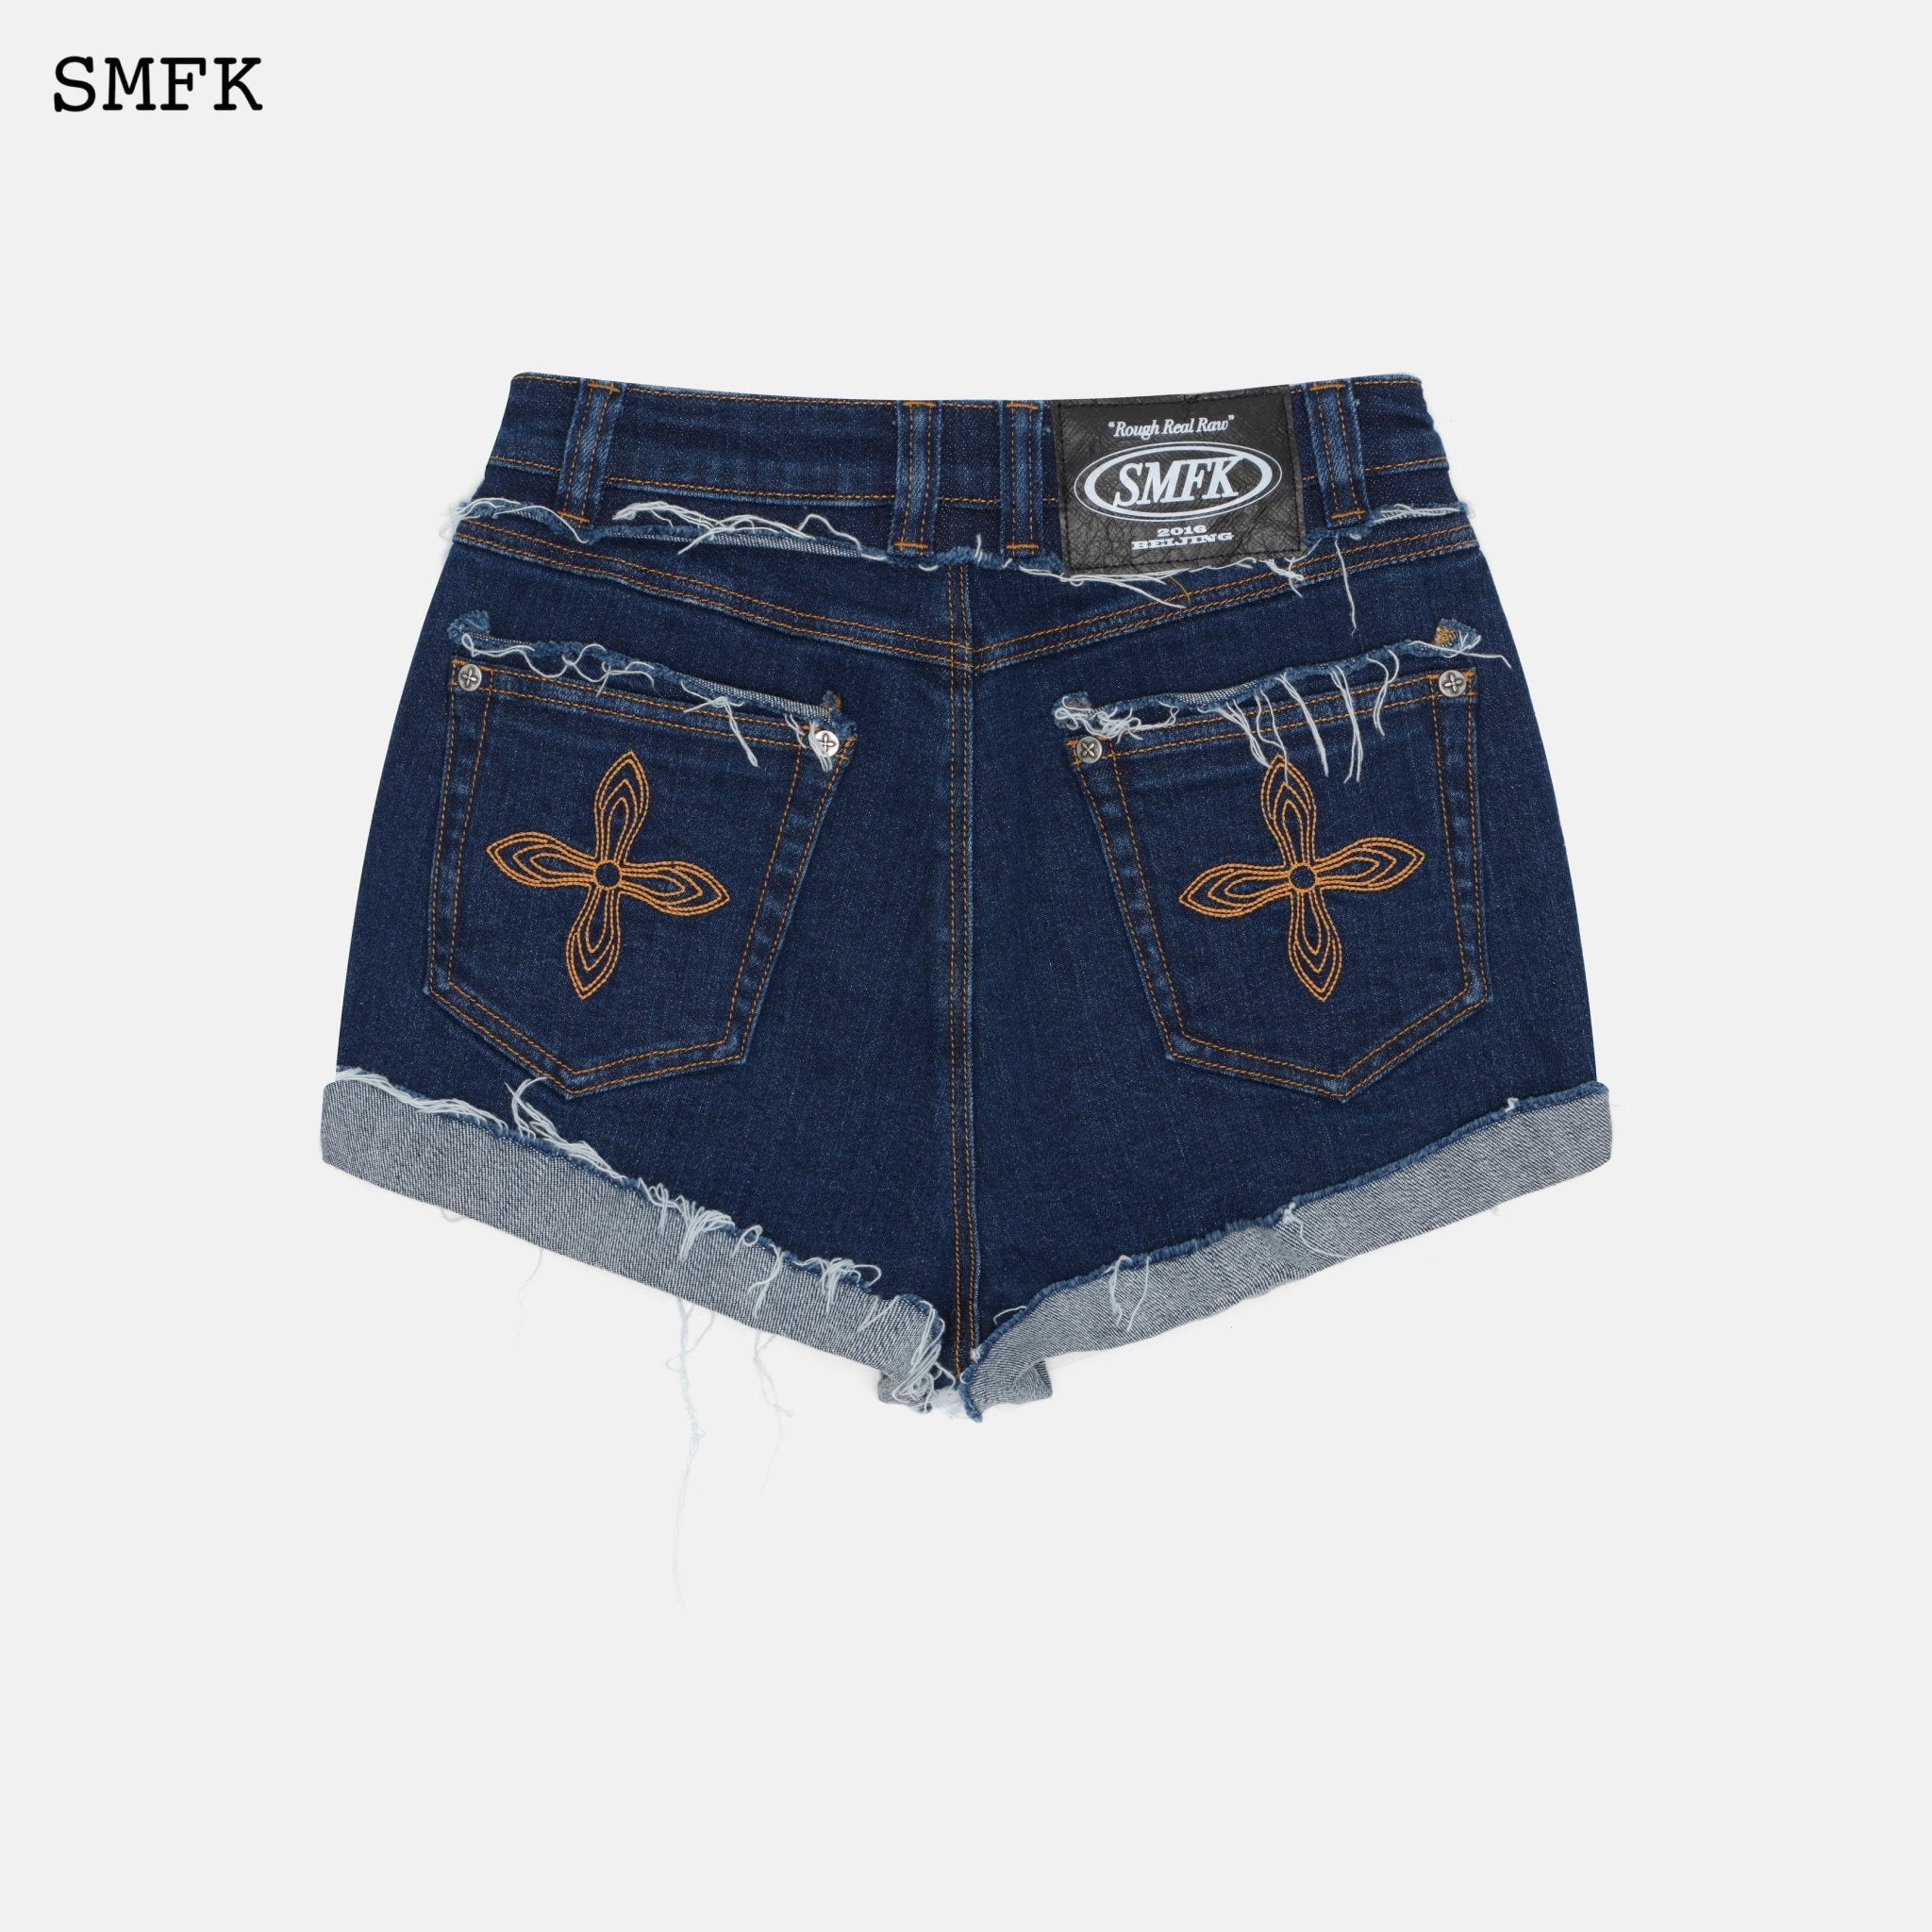 SMFK Compass Academy Navy Short Jeans | MADA IN CHINA